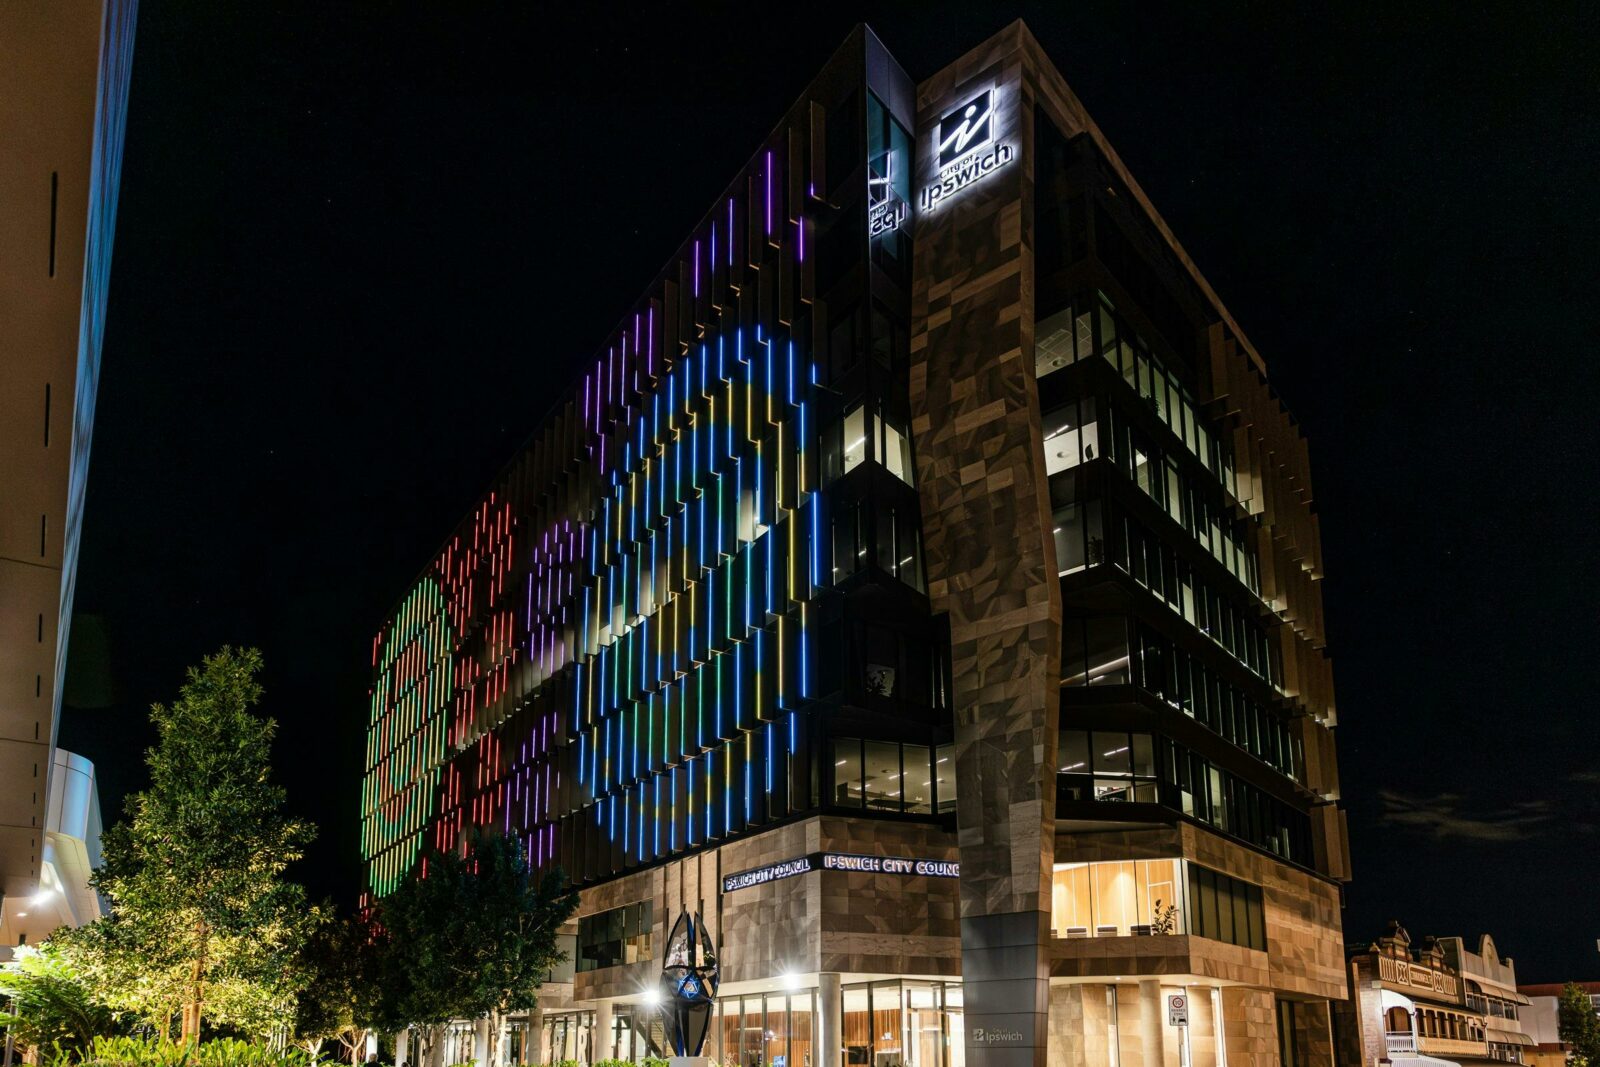 Light projection onto building